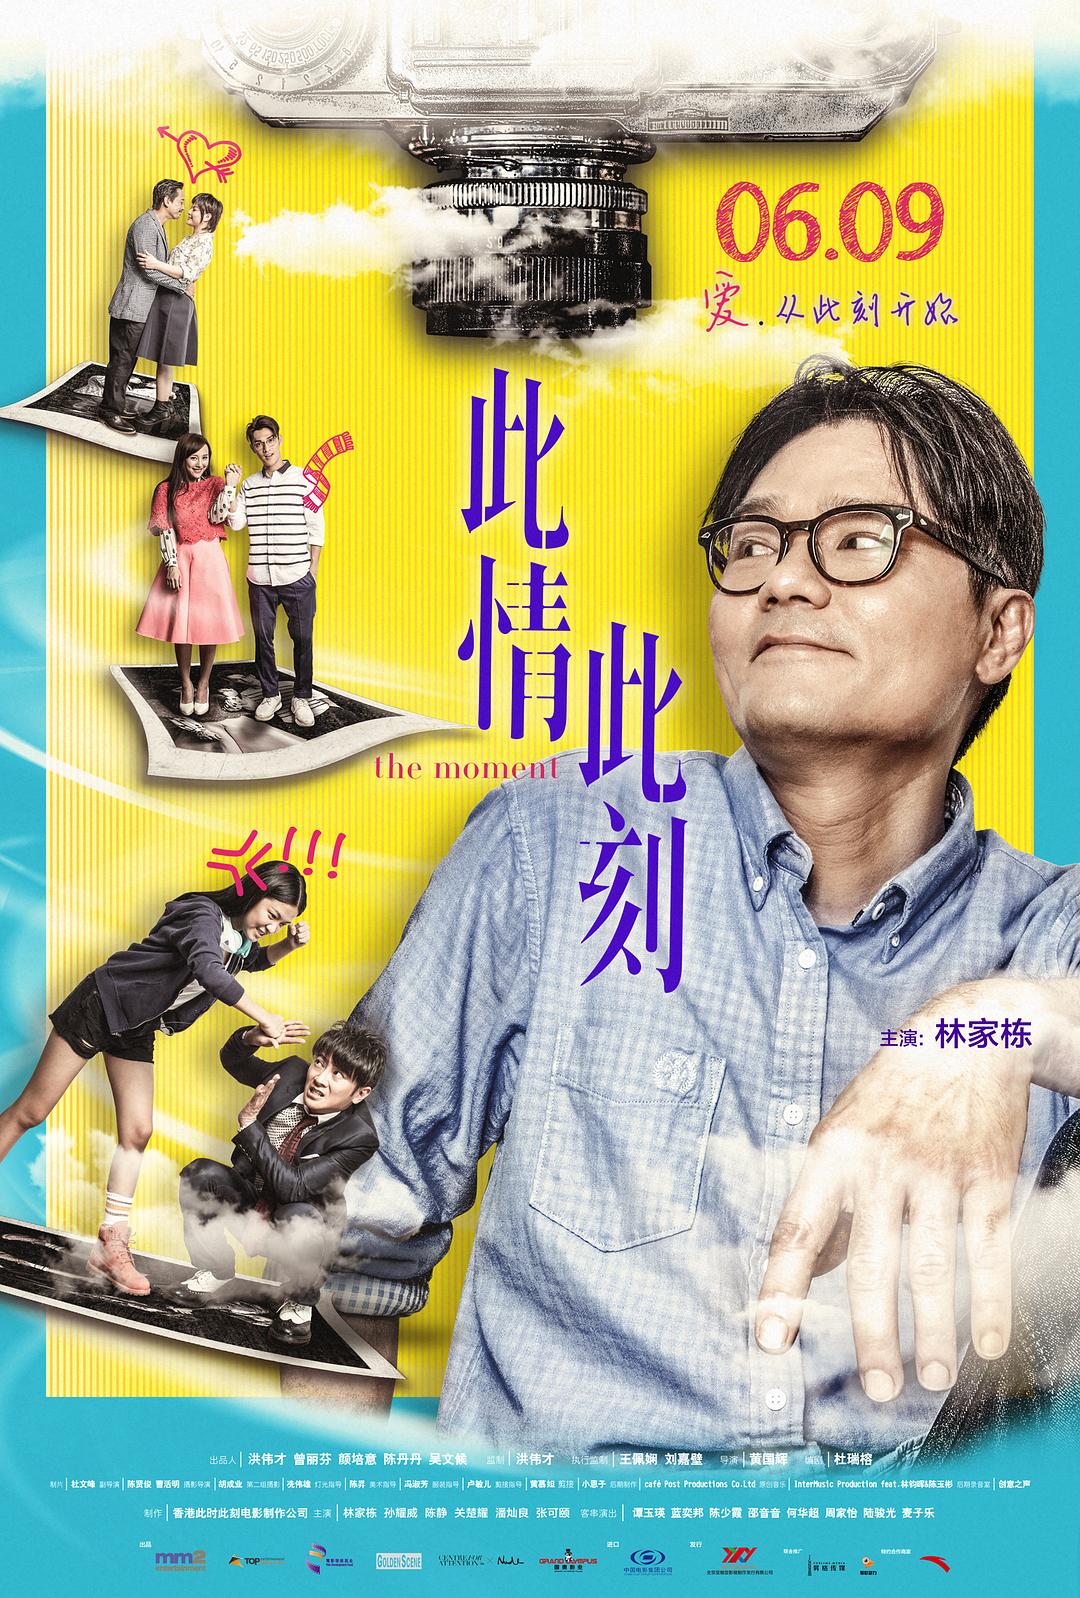 ˿ The.Moment.2016.CHINESE.1080p.BluRay.x264.DD5.1-HDC 7.49GB-1.png